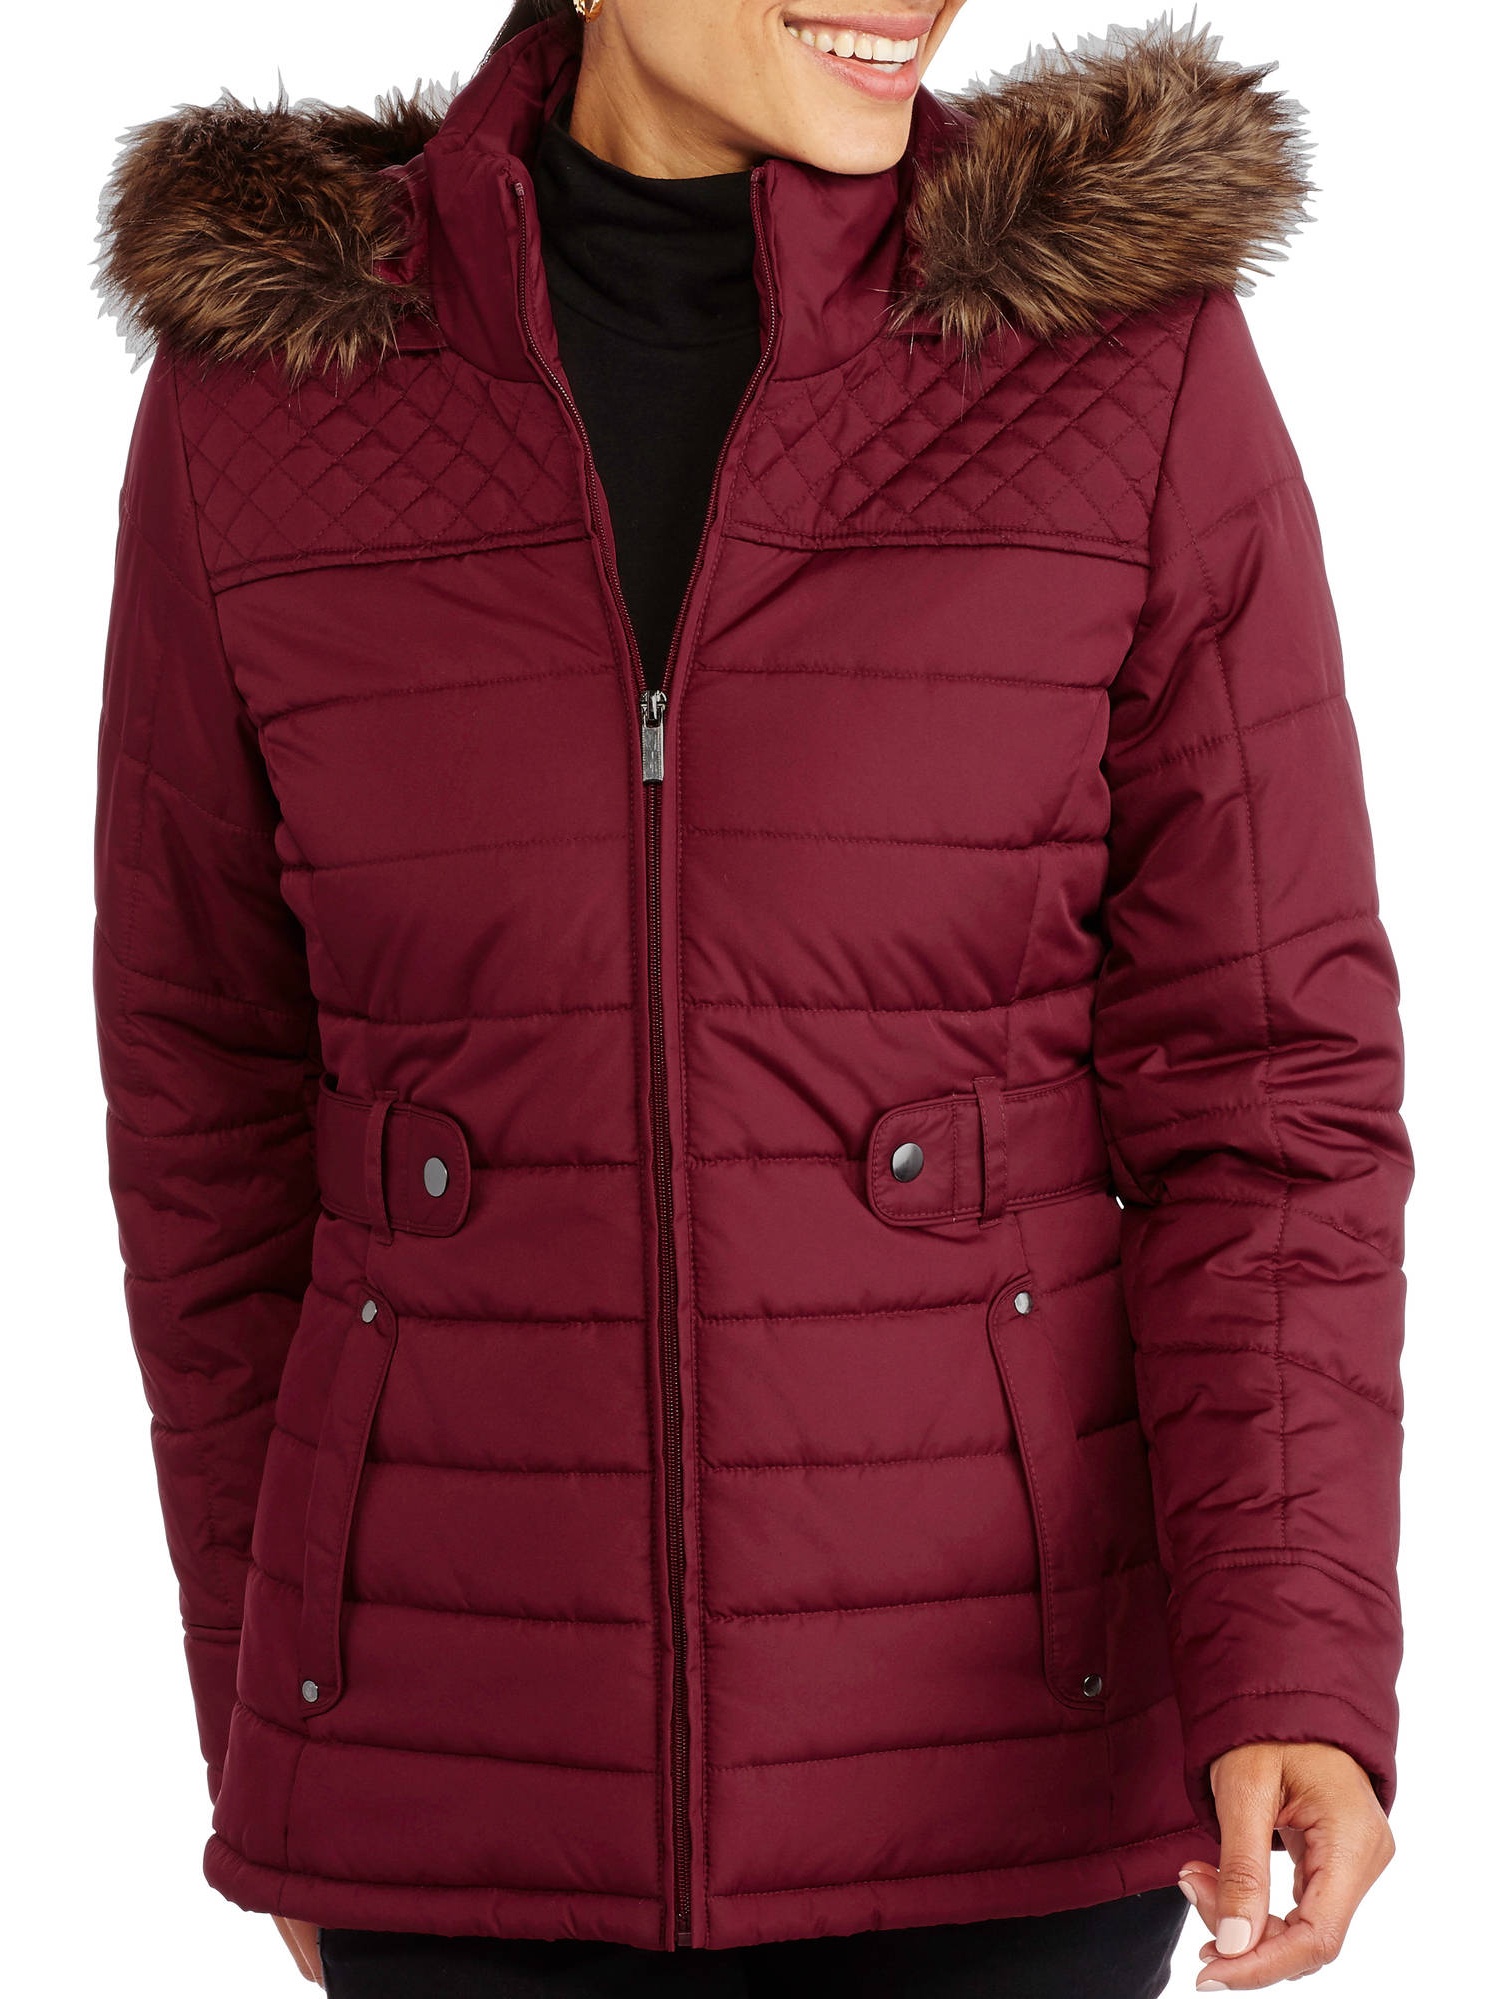 Women's Fashion Puffer Coat With Fur-Trimmed Hood - image 1 of 2